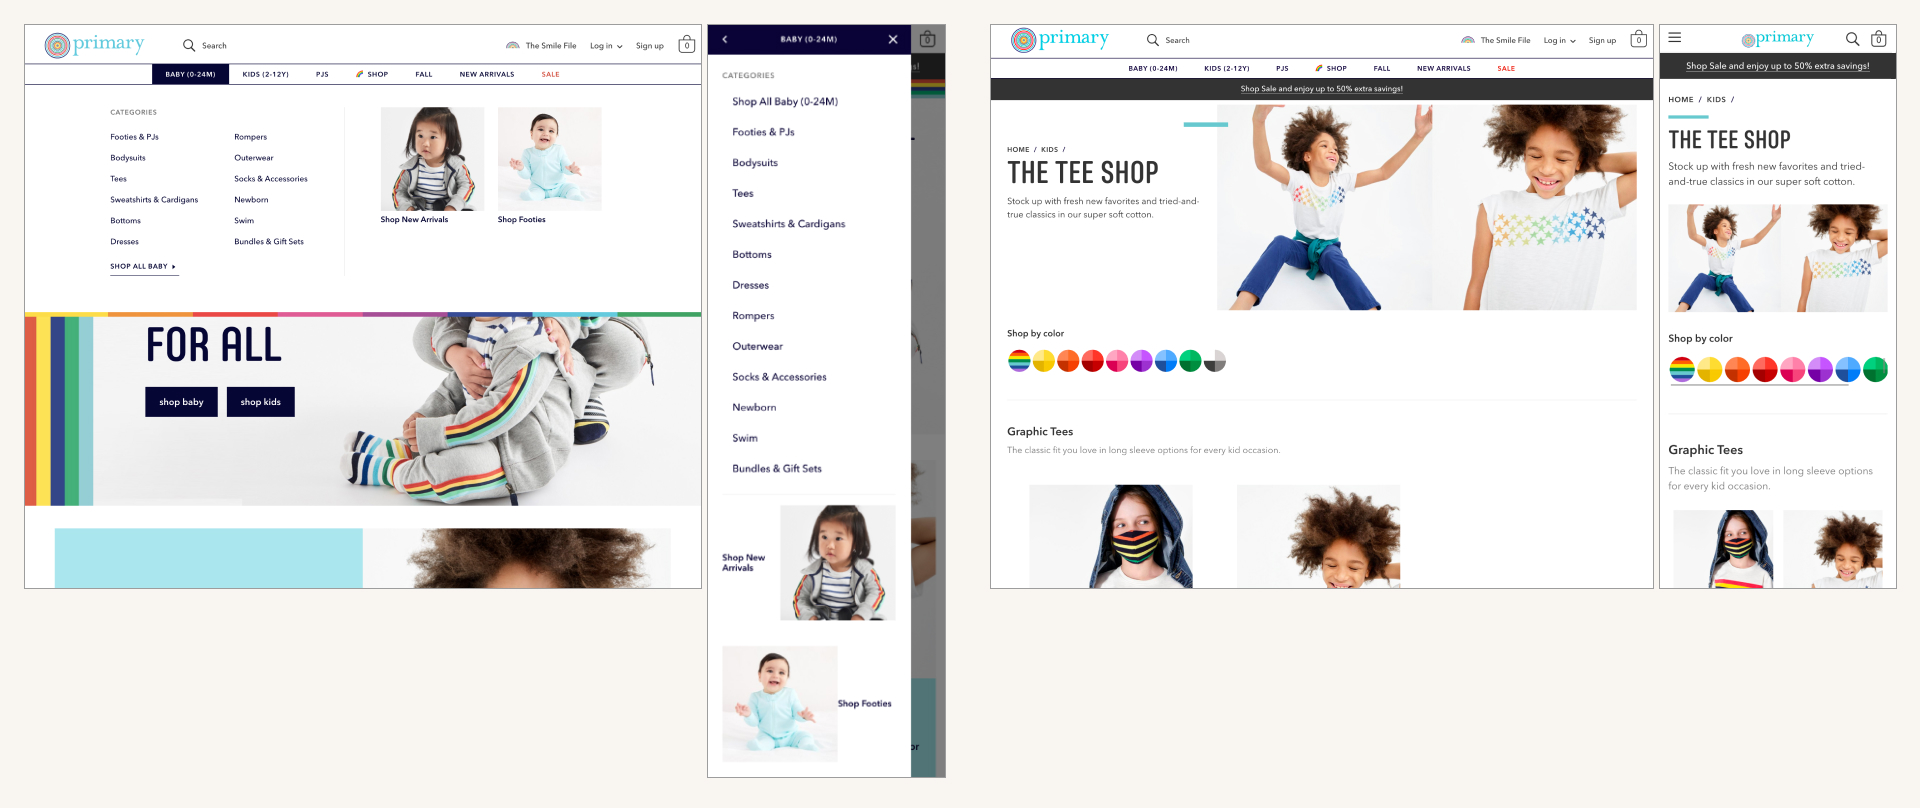 Screenshots of the product list page and navigation before the rebrand. The nav drawer has two spots with square images that each link to products, and the headers of the product list page are large lifestyle images with supporting headlines and subheads.